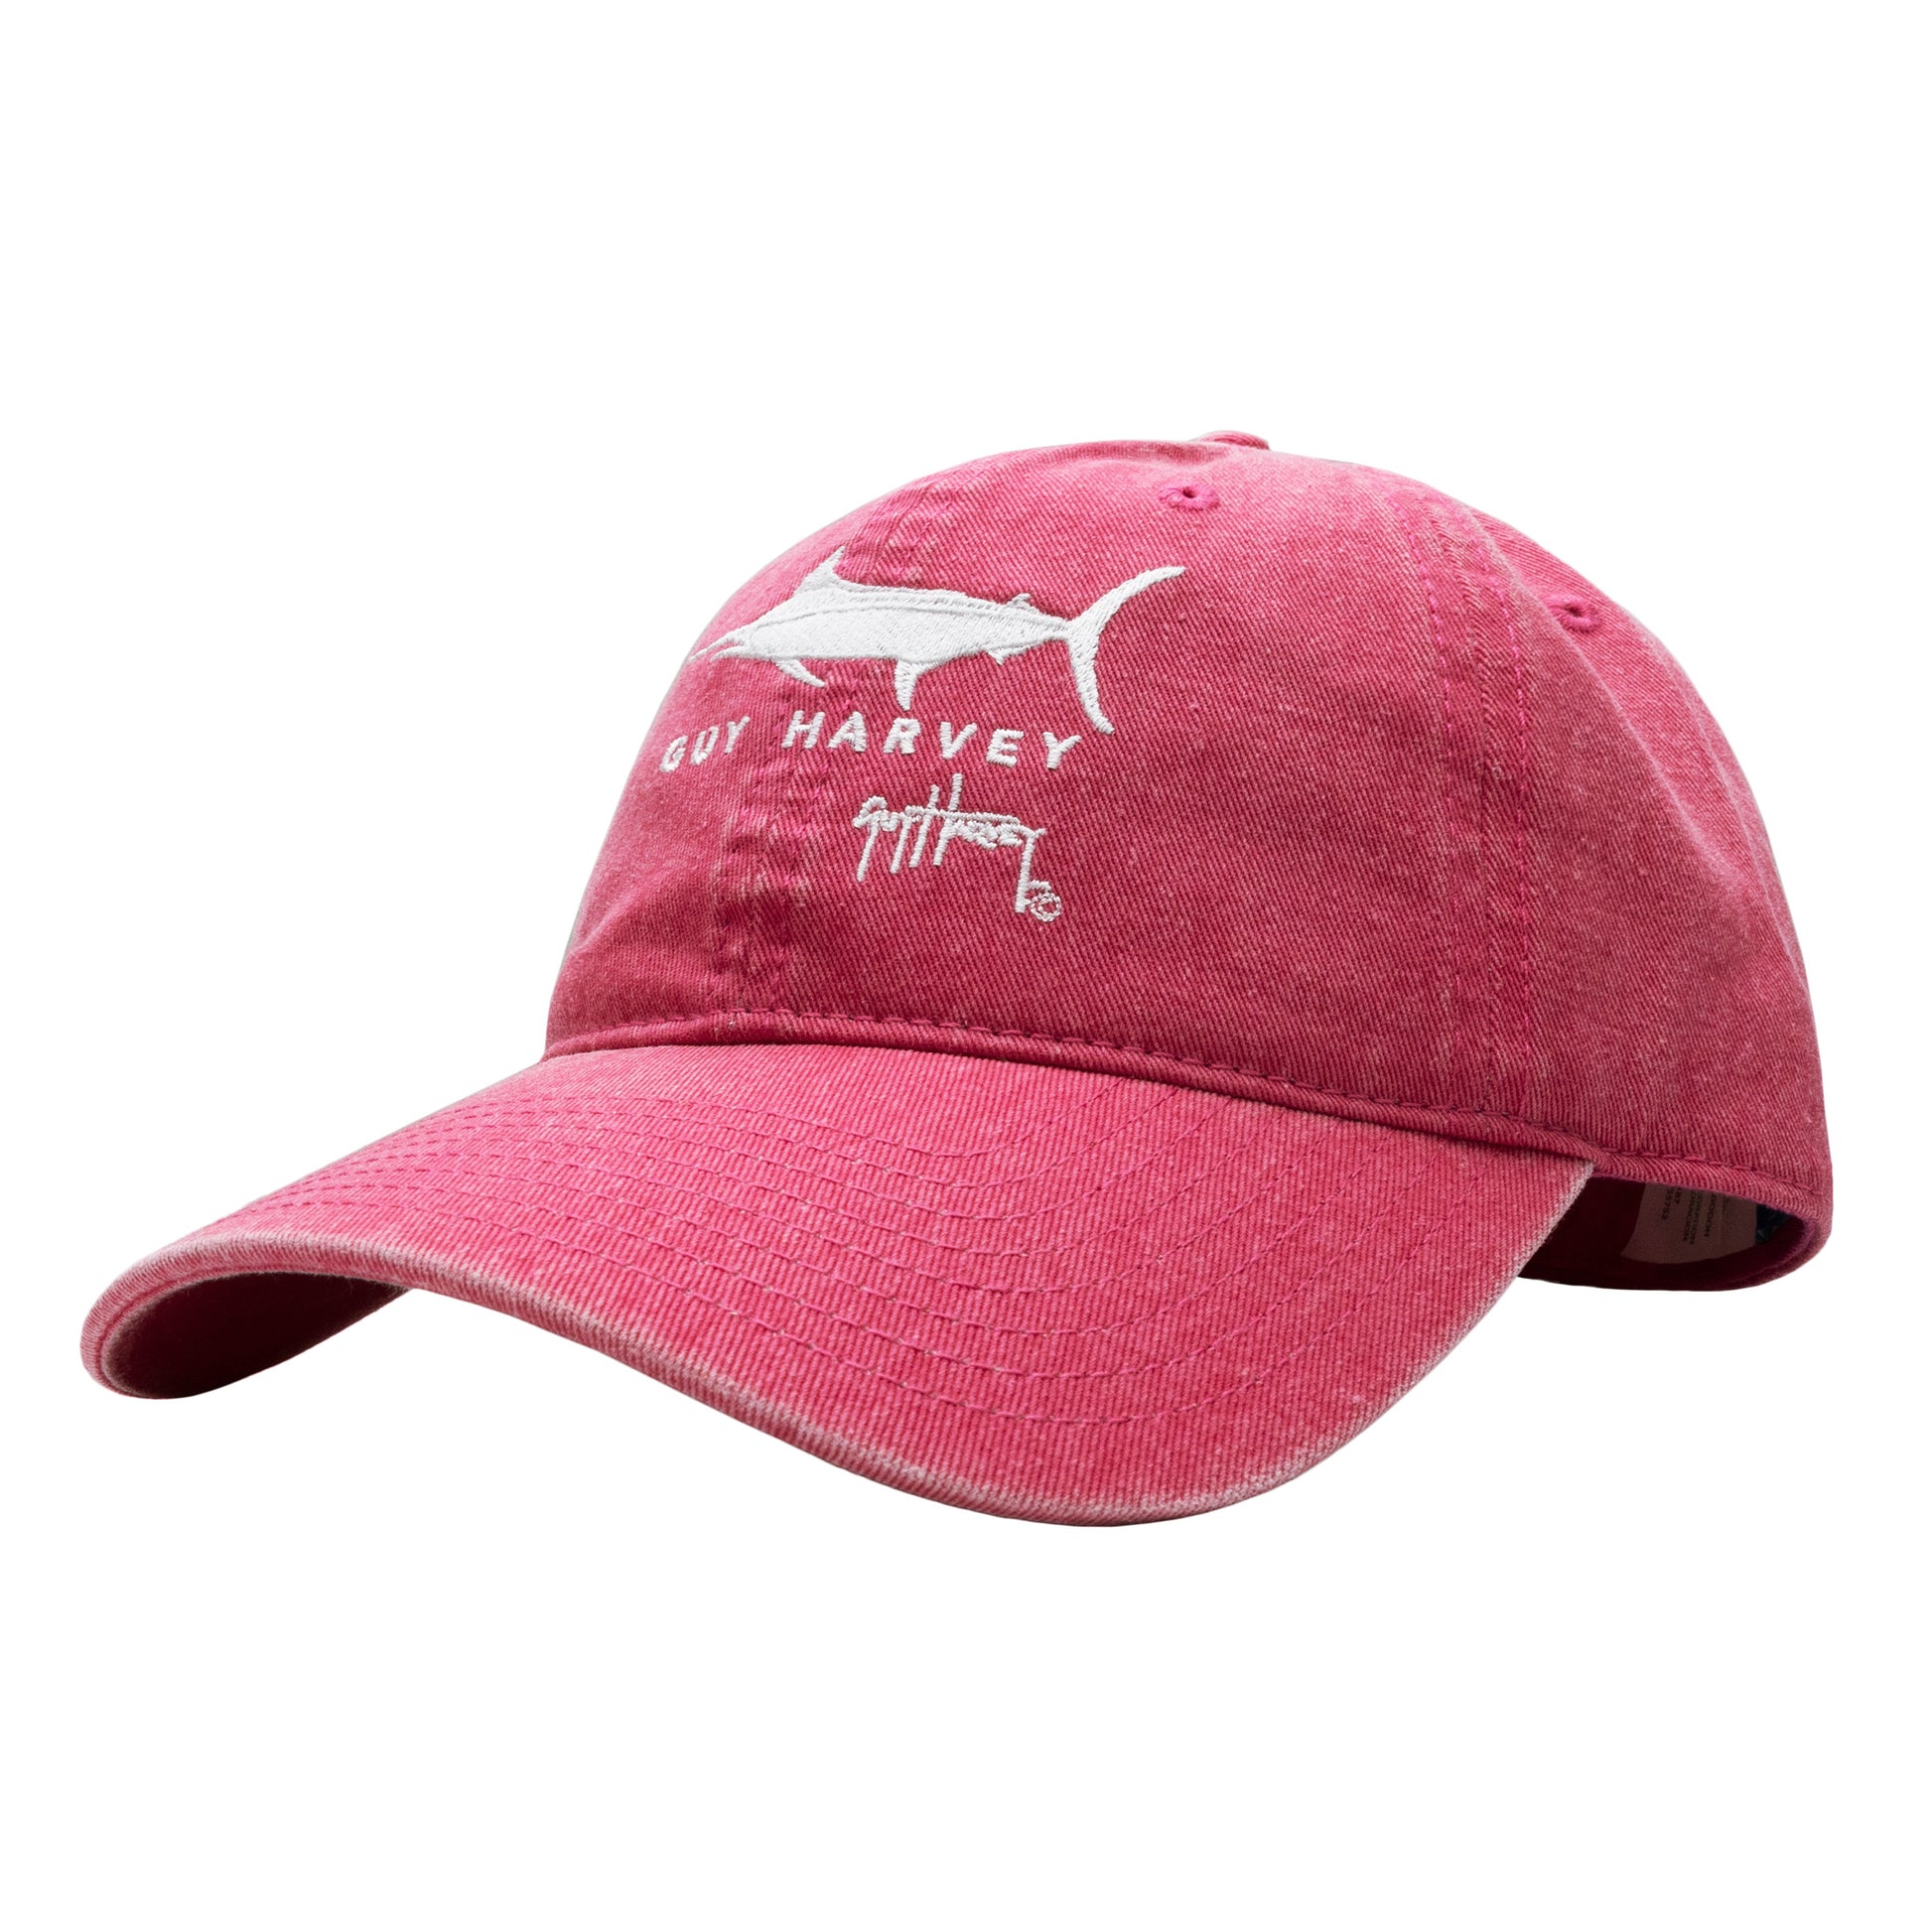 Sketchier Green Embroidered Hat – Guy Harvey